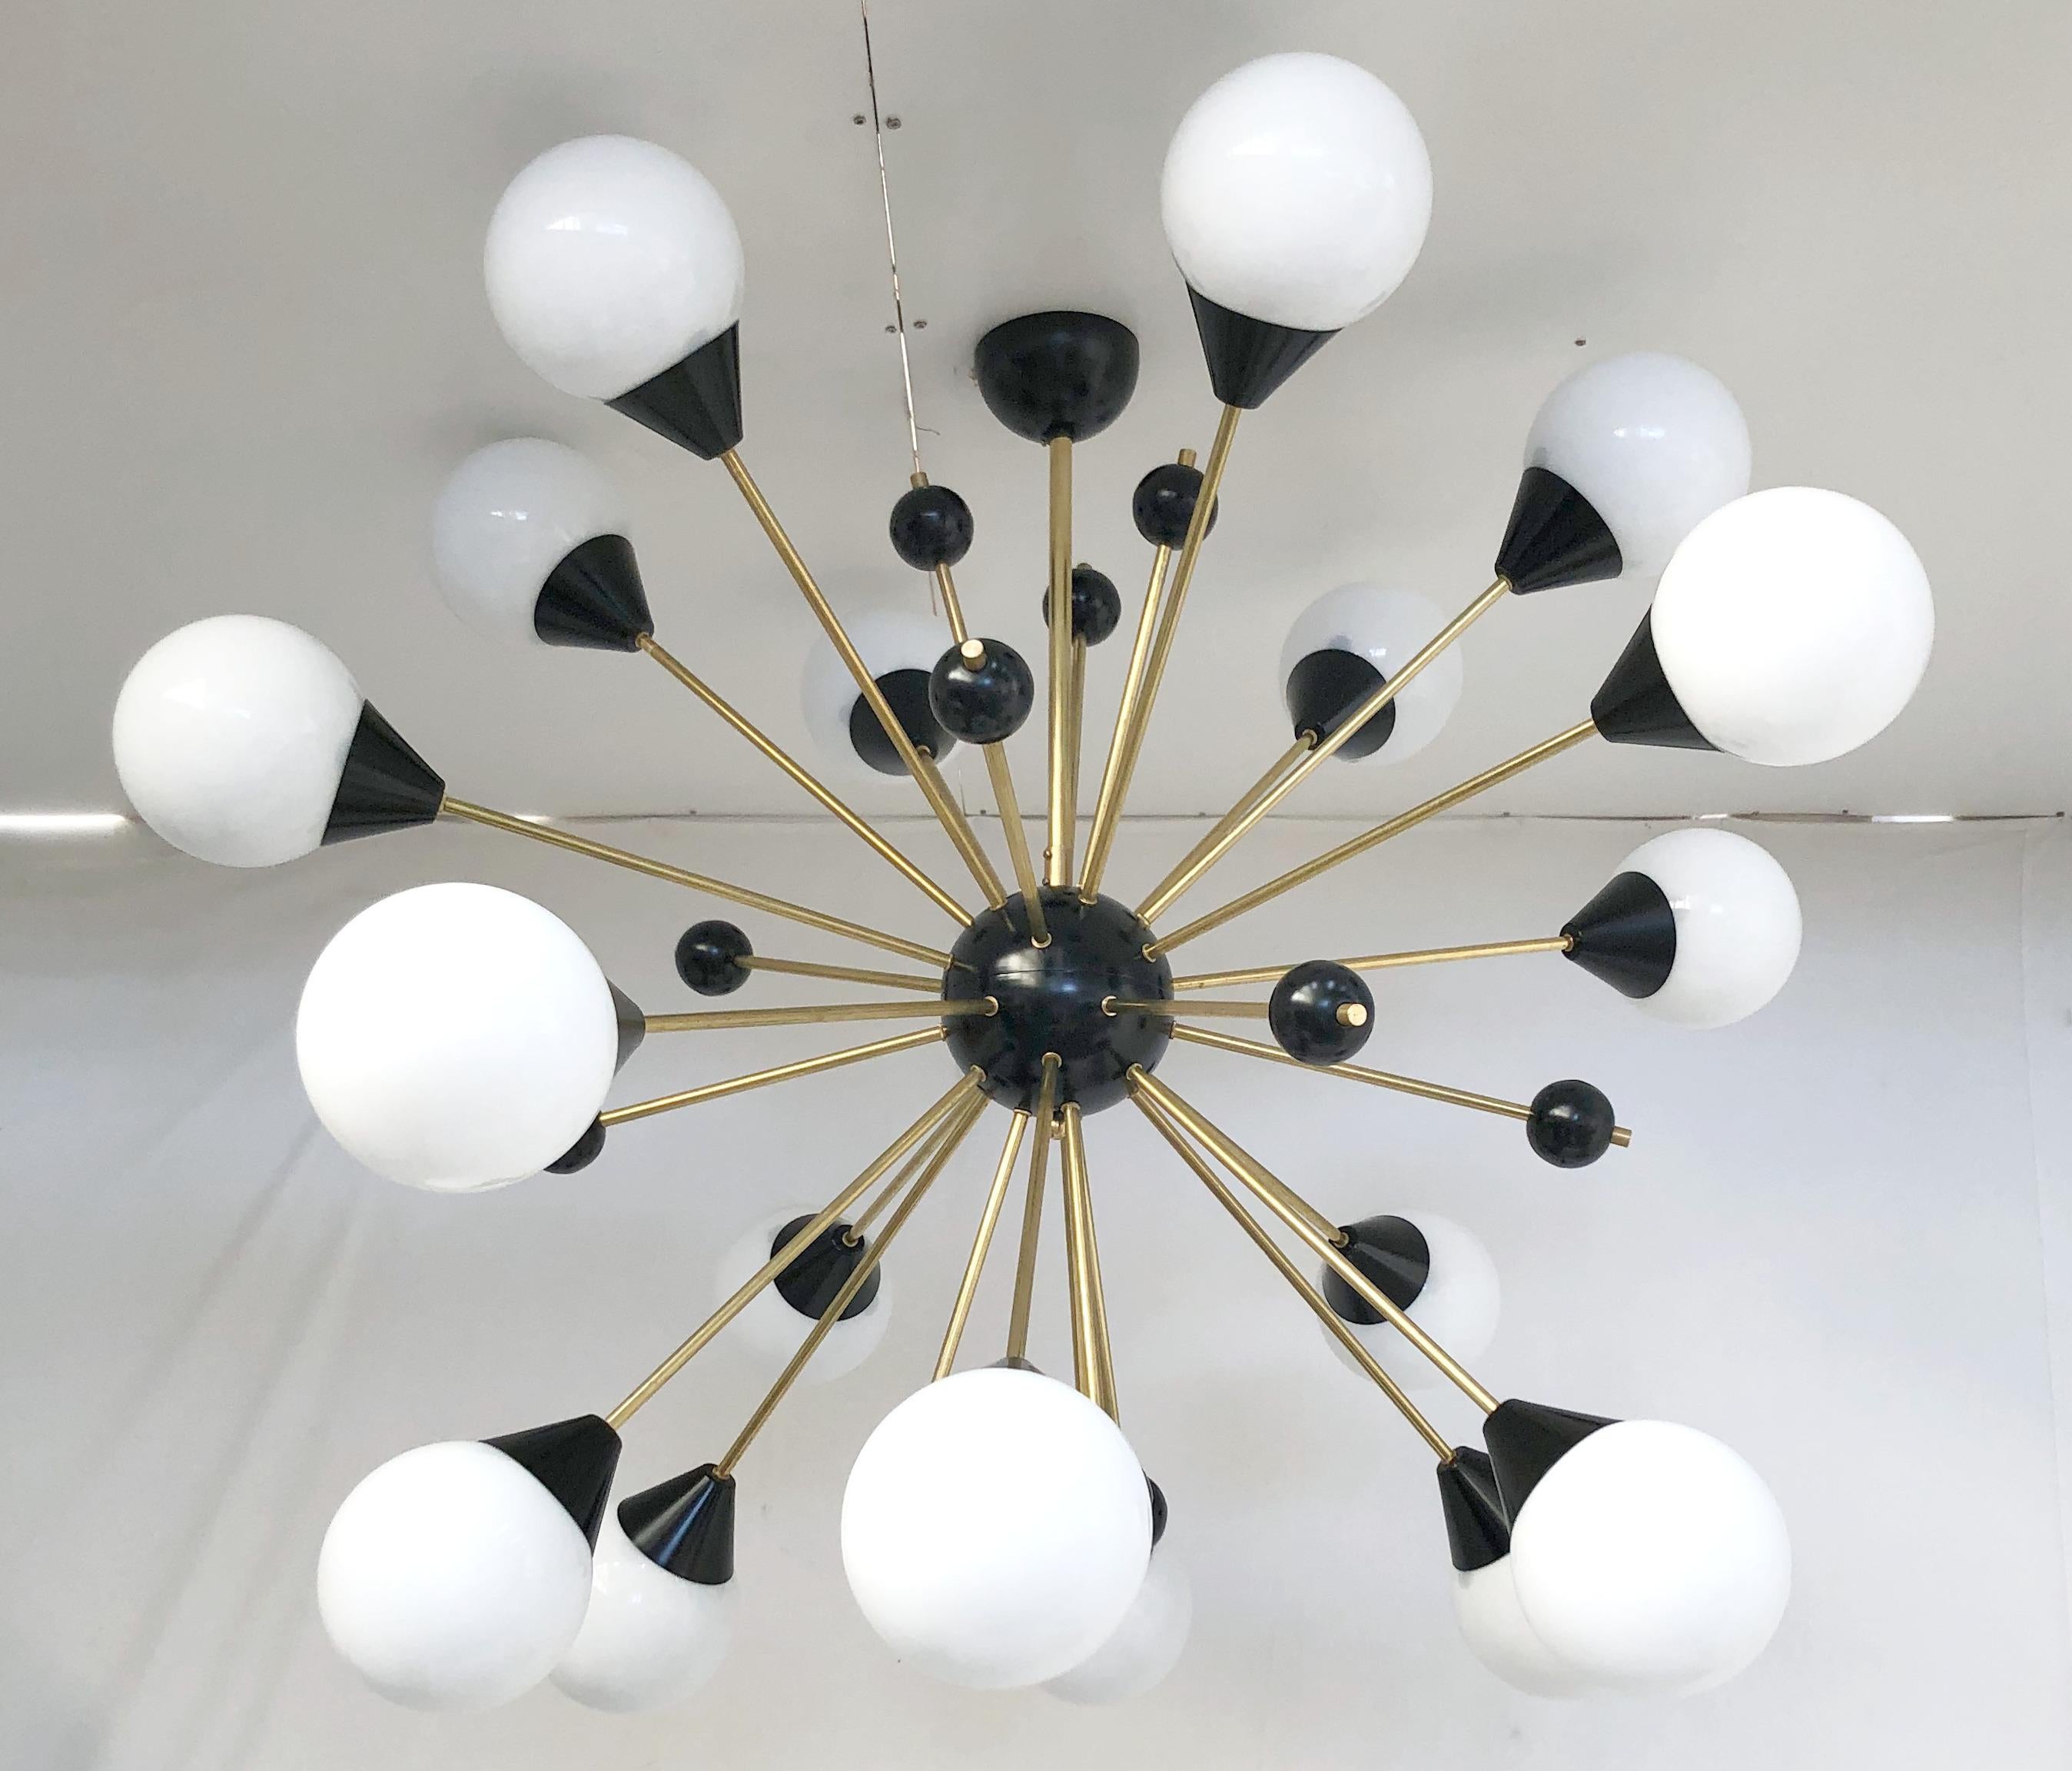 Italian midcentury style Sputnik chandelier with 18 glossy white Murano glass globes on unlacquered natural brass stems, with small black decorative globes, black center and ceiling canopy / designed by Fabio Bergomi for Fabio Ltd, made in